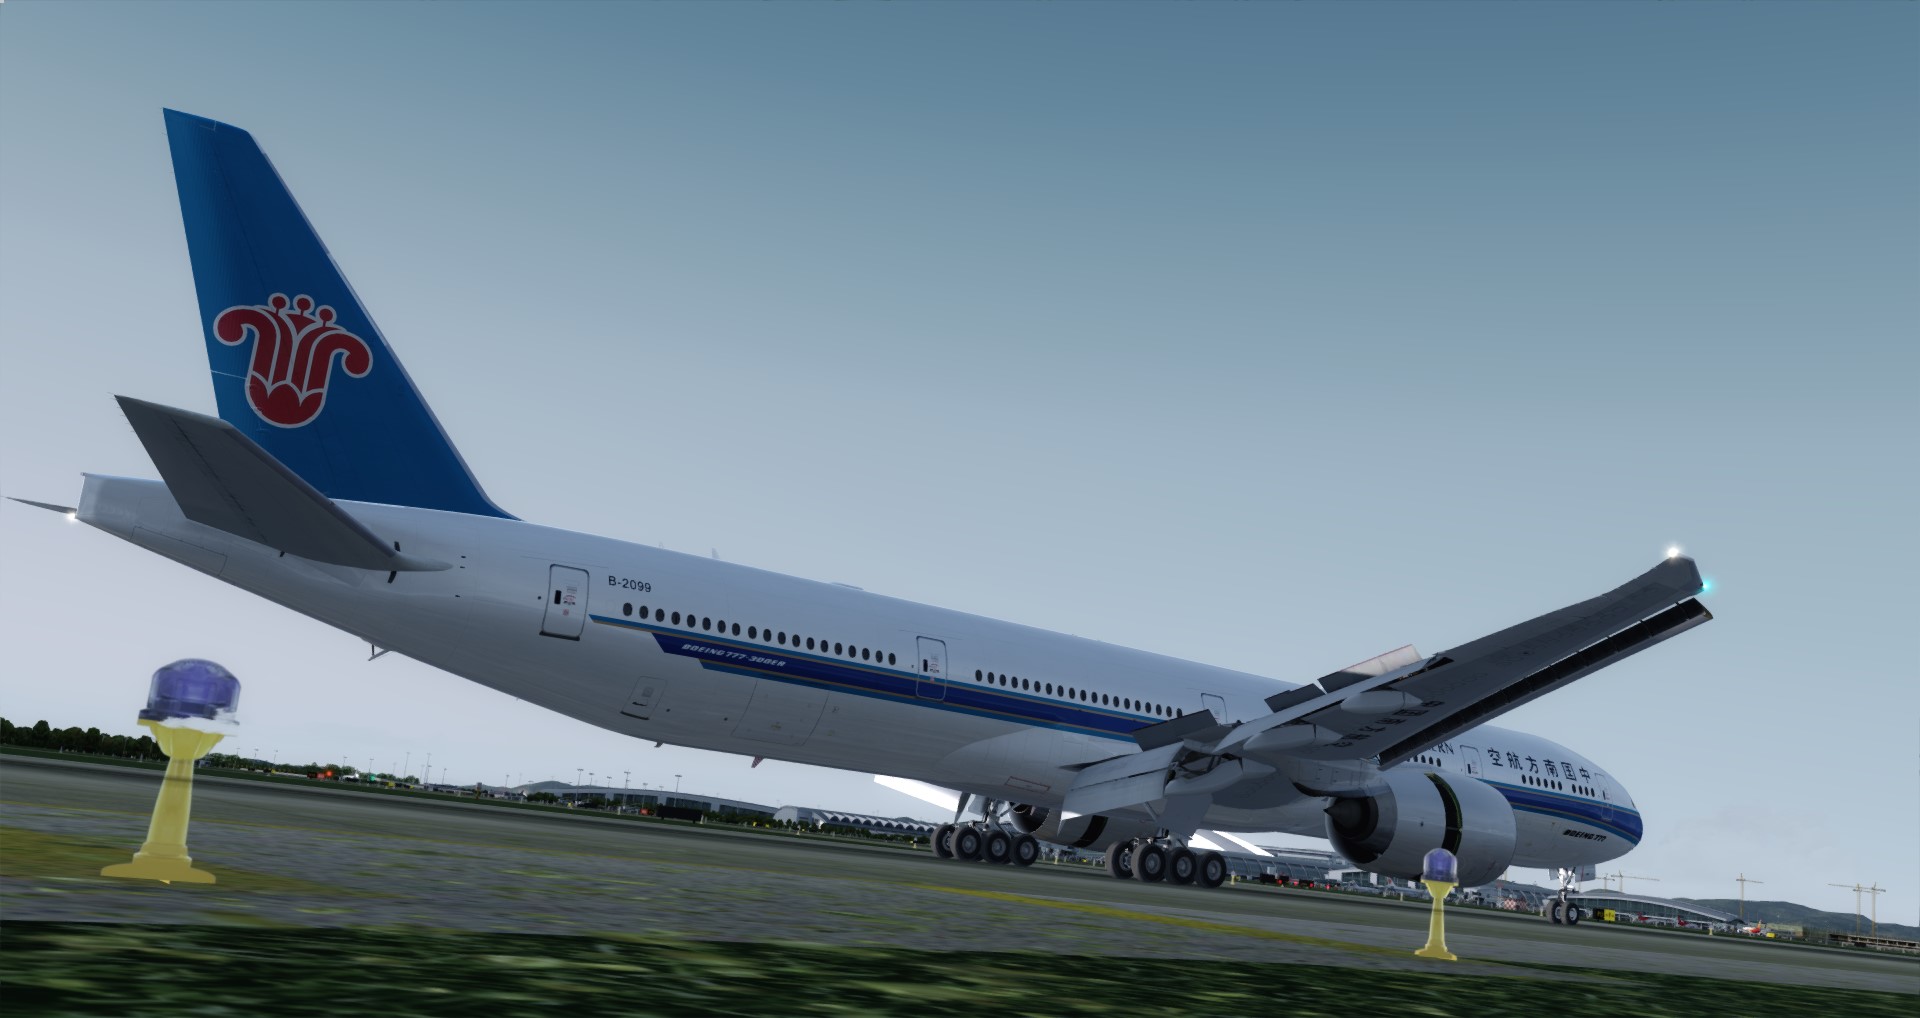 P3D V4 77W China Southern Airlines WADD-ZGGG 营救同胞-5407 